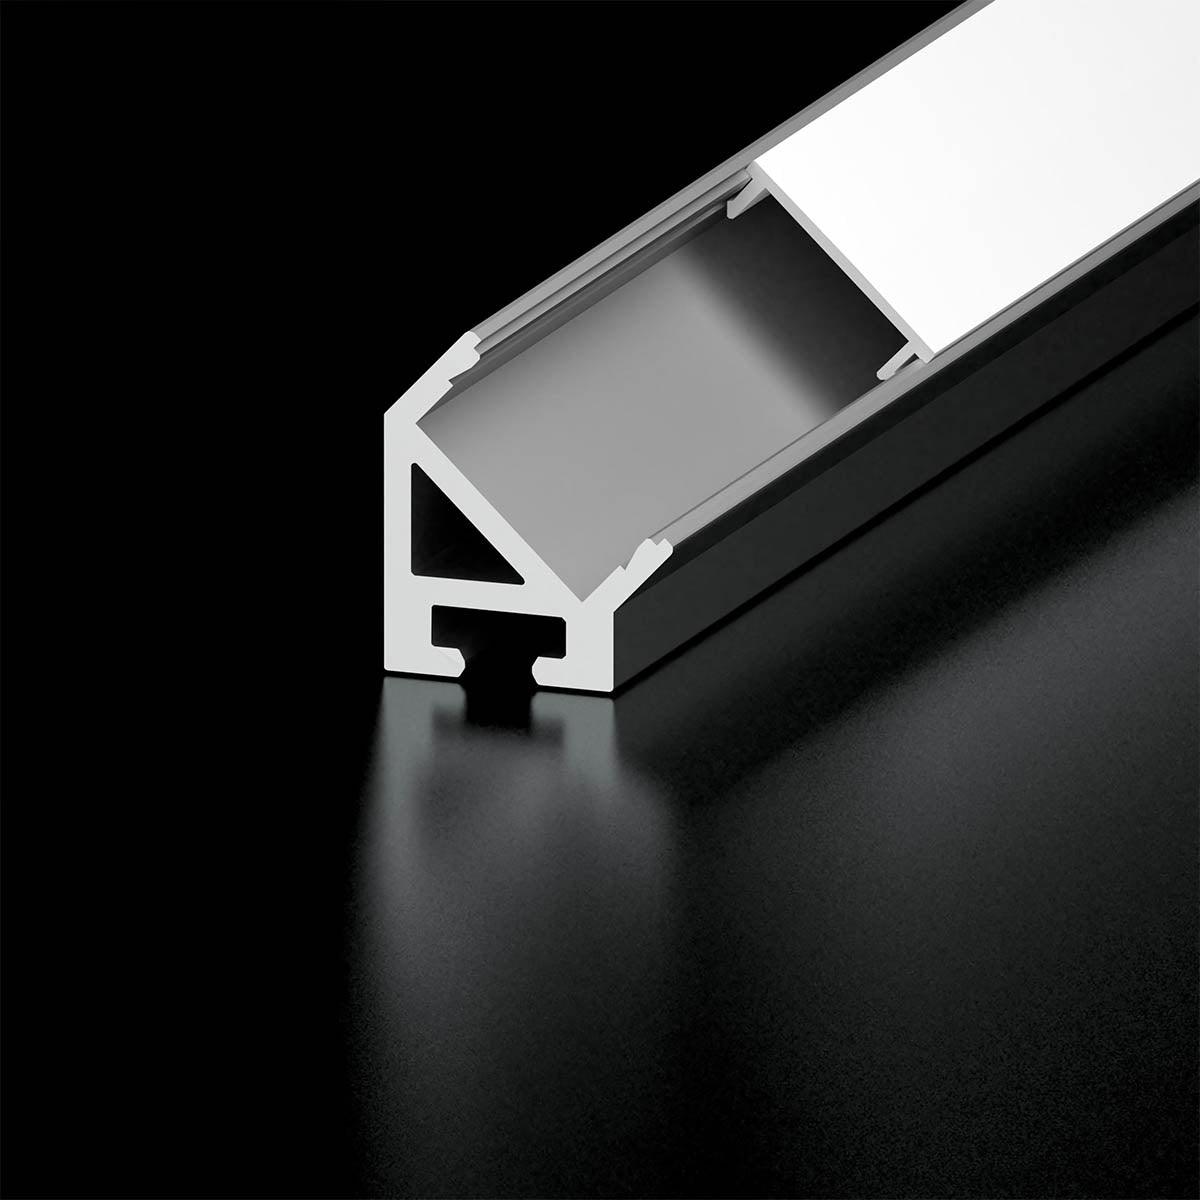 48in. Chromapath Builder, 45 degree LED channel, Corner, for Strips Up To 12mm, Black